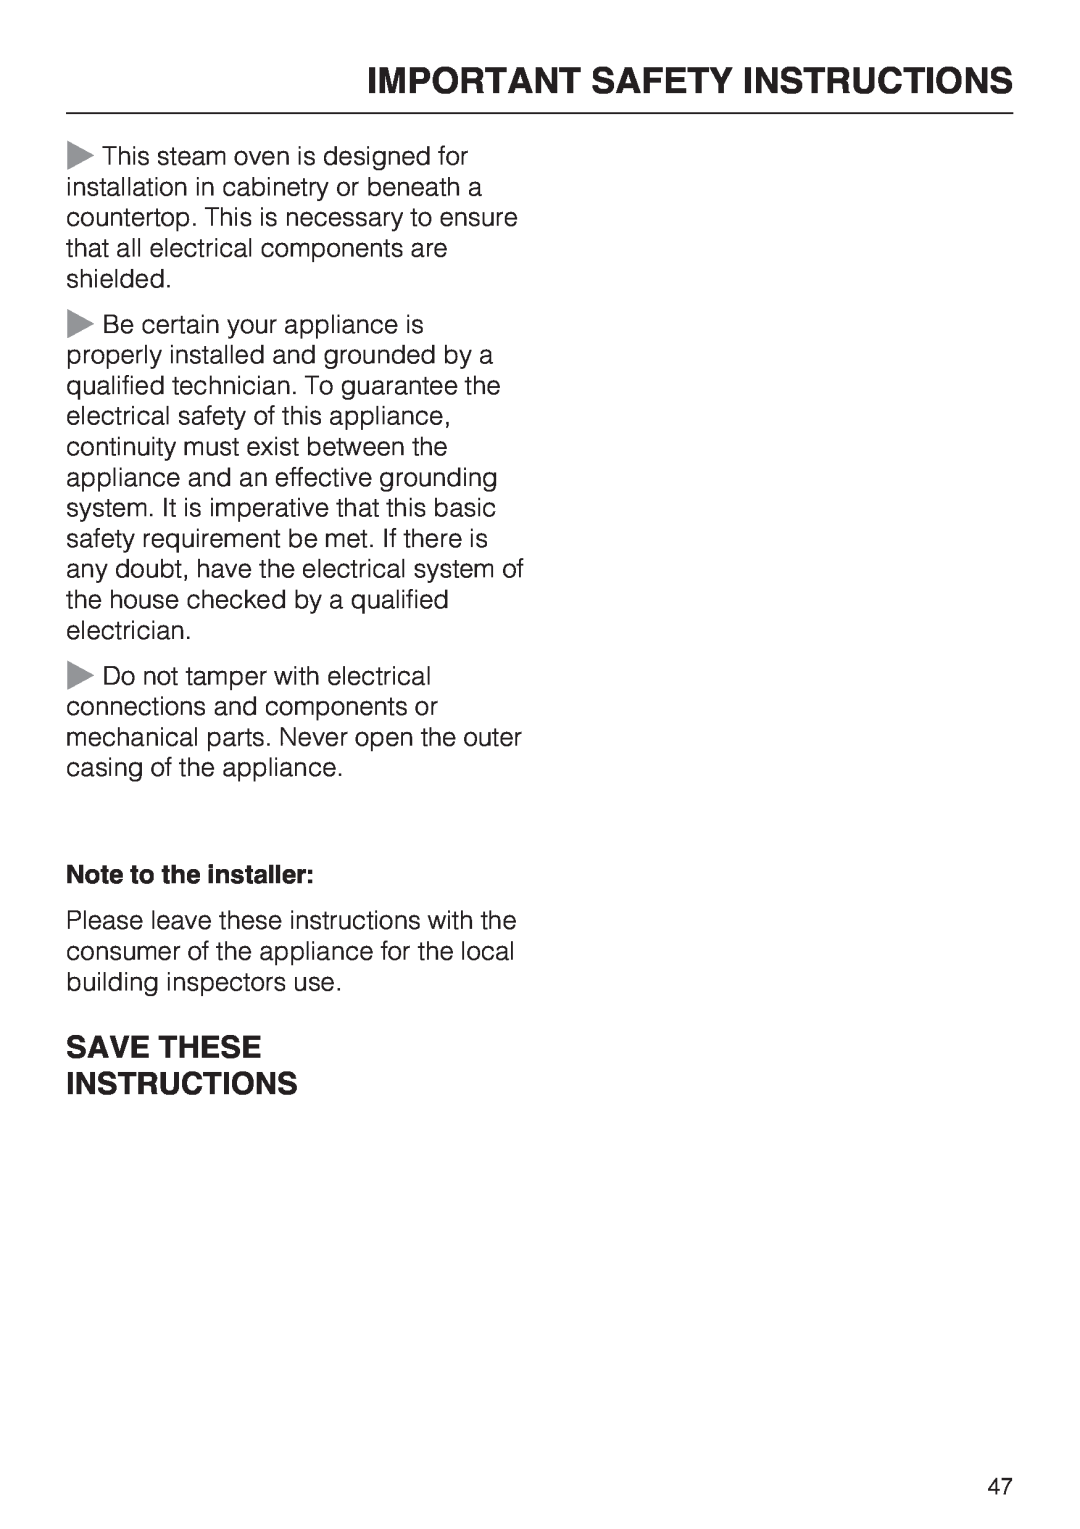 Miele DG 4088, DG4082 Save These Instructions, Important Safety Instructions, Note to the installer 